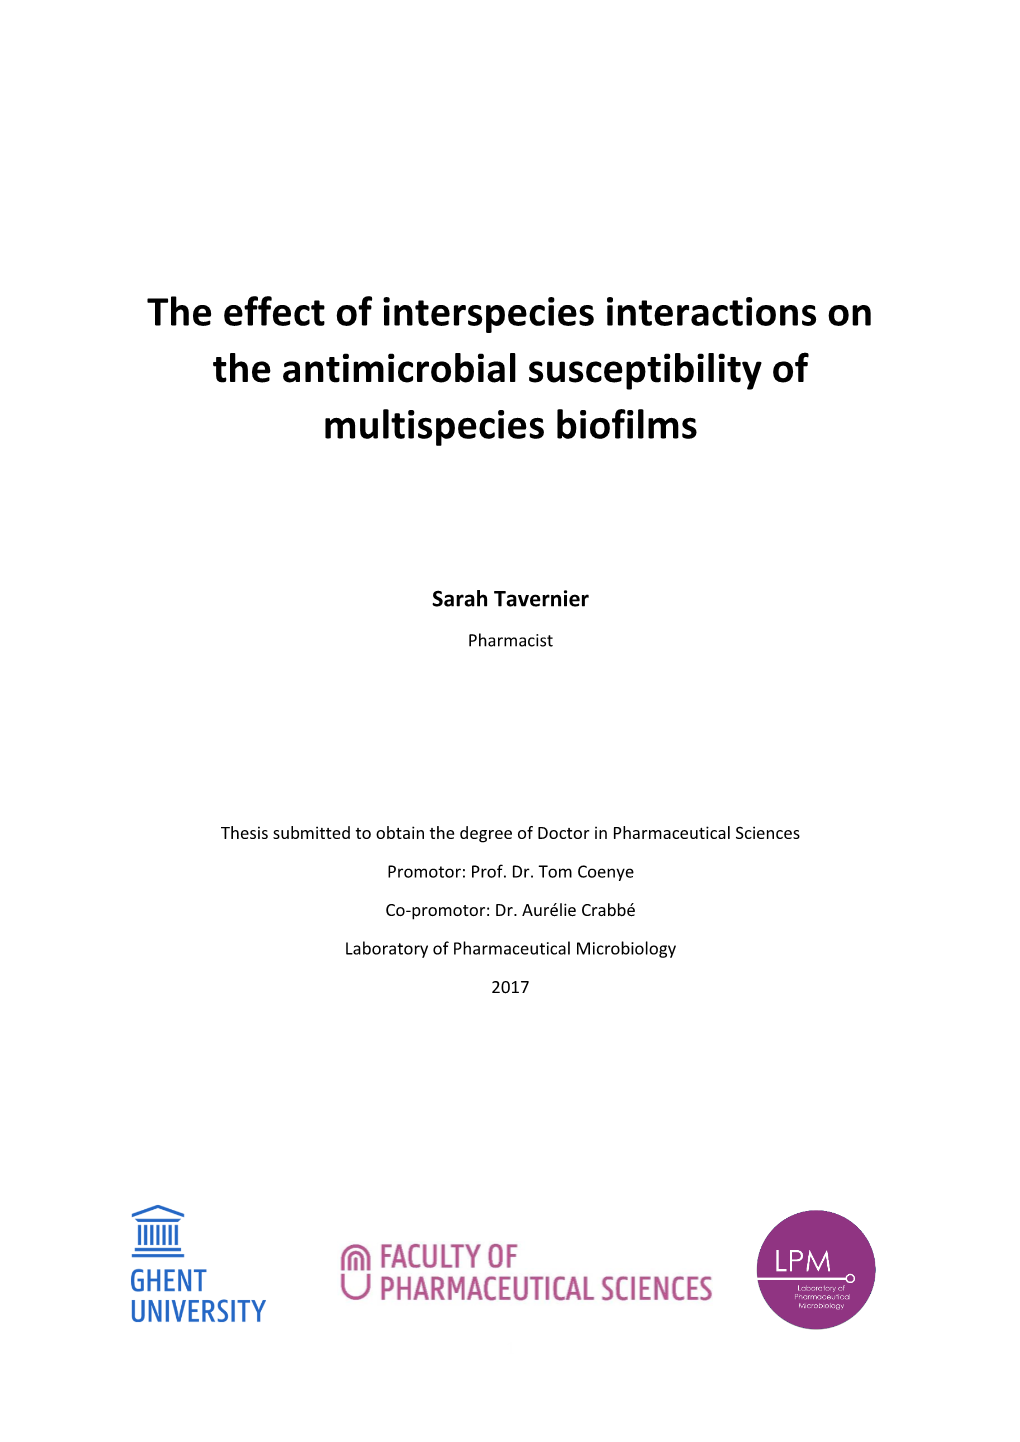 The Effect of Interspecies Interactions on the Antimicrobial Susceptibility of Multispecies Biofilms